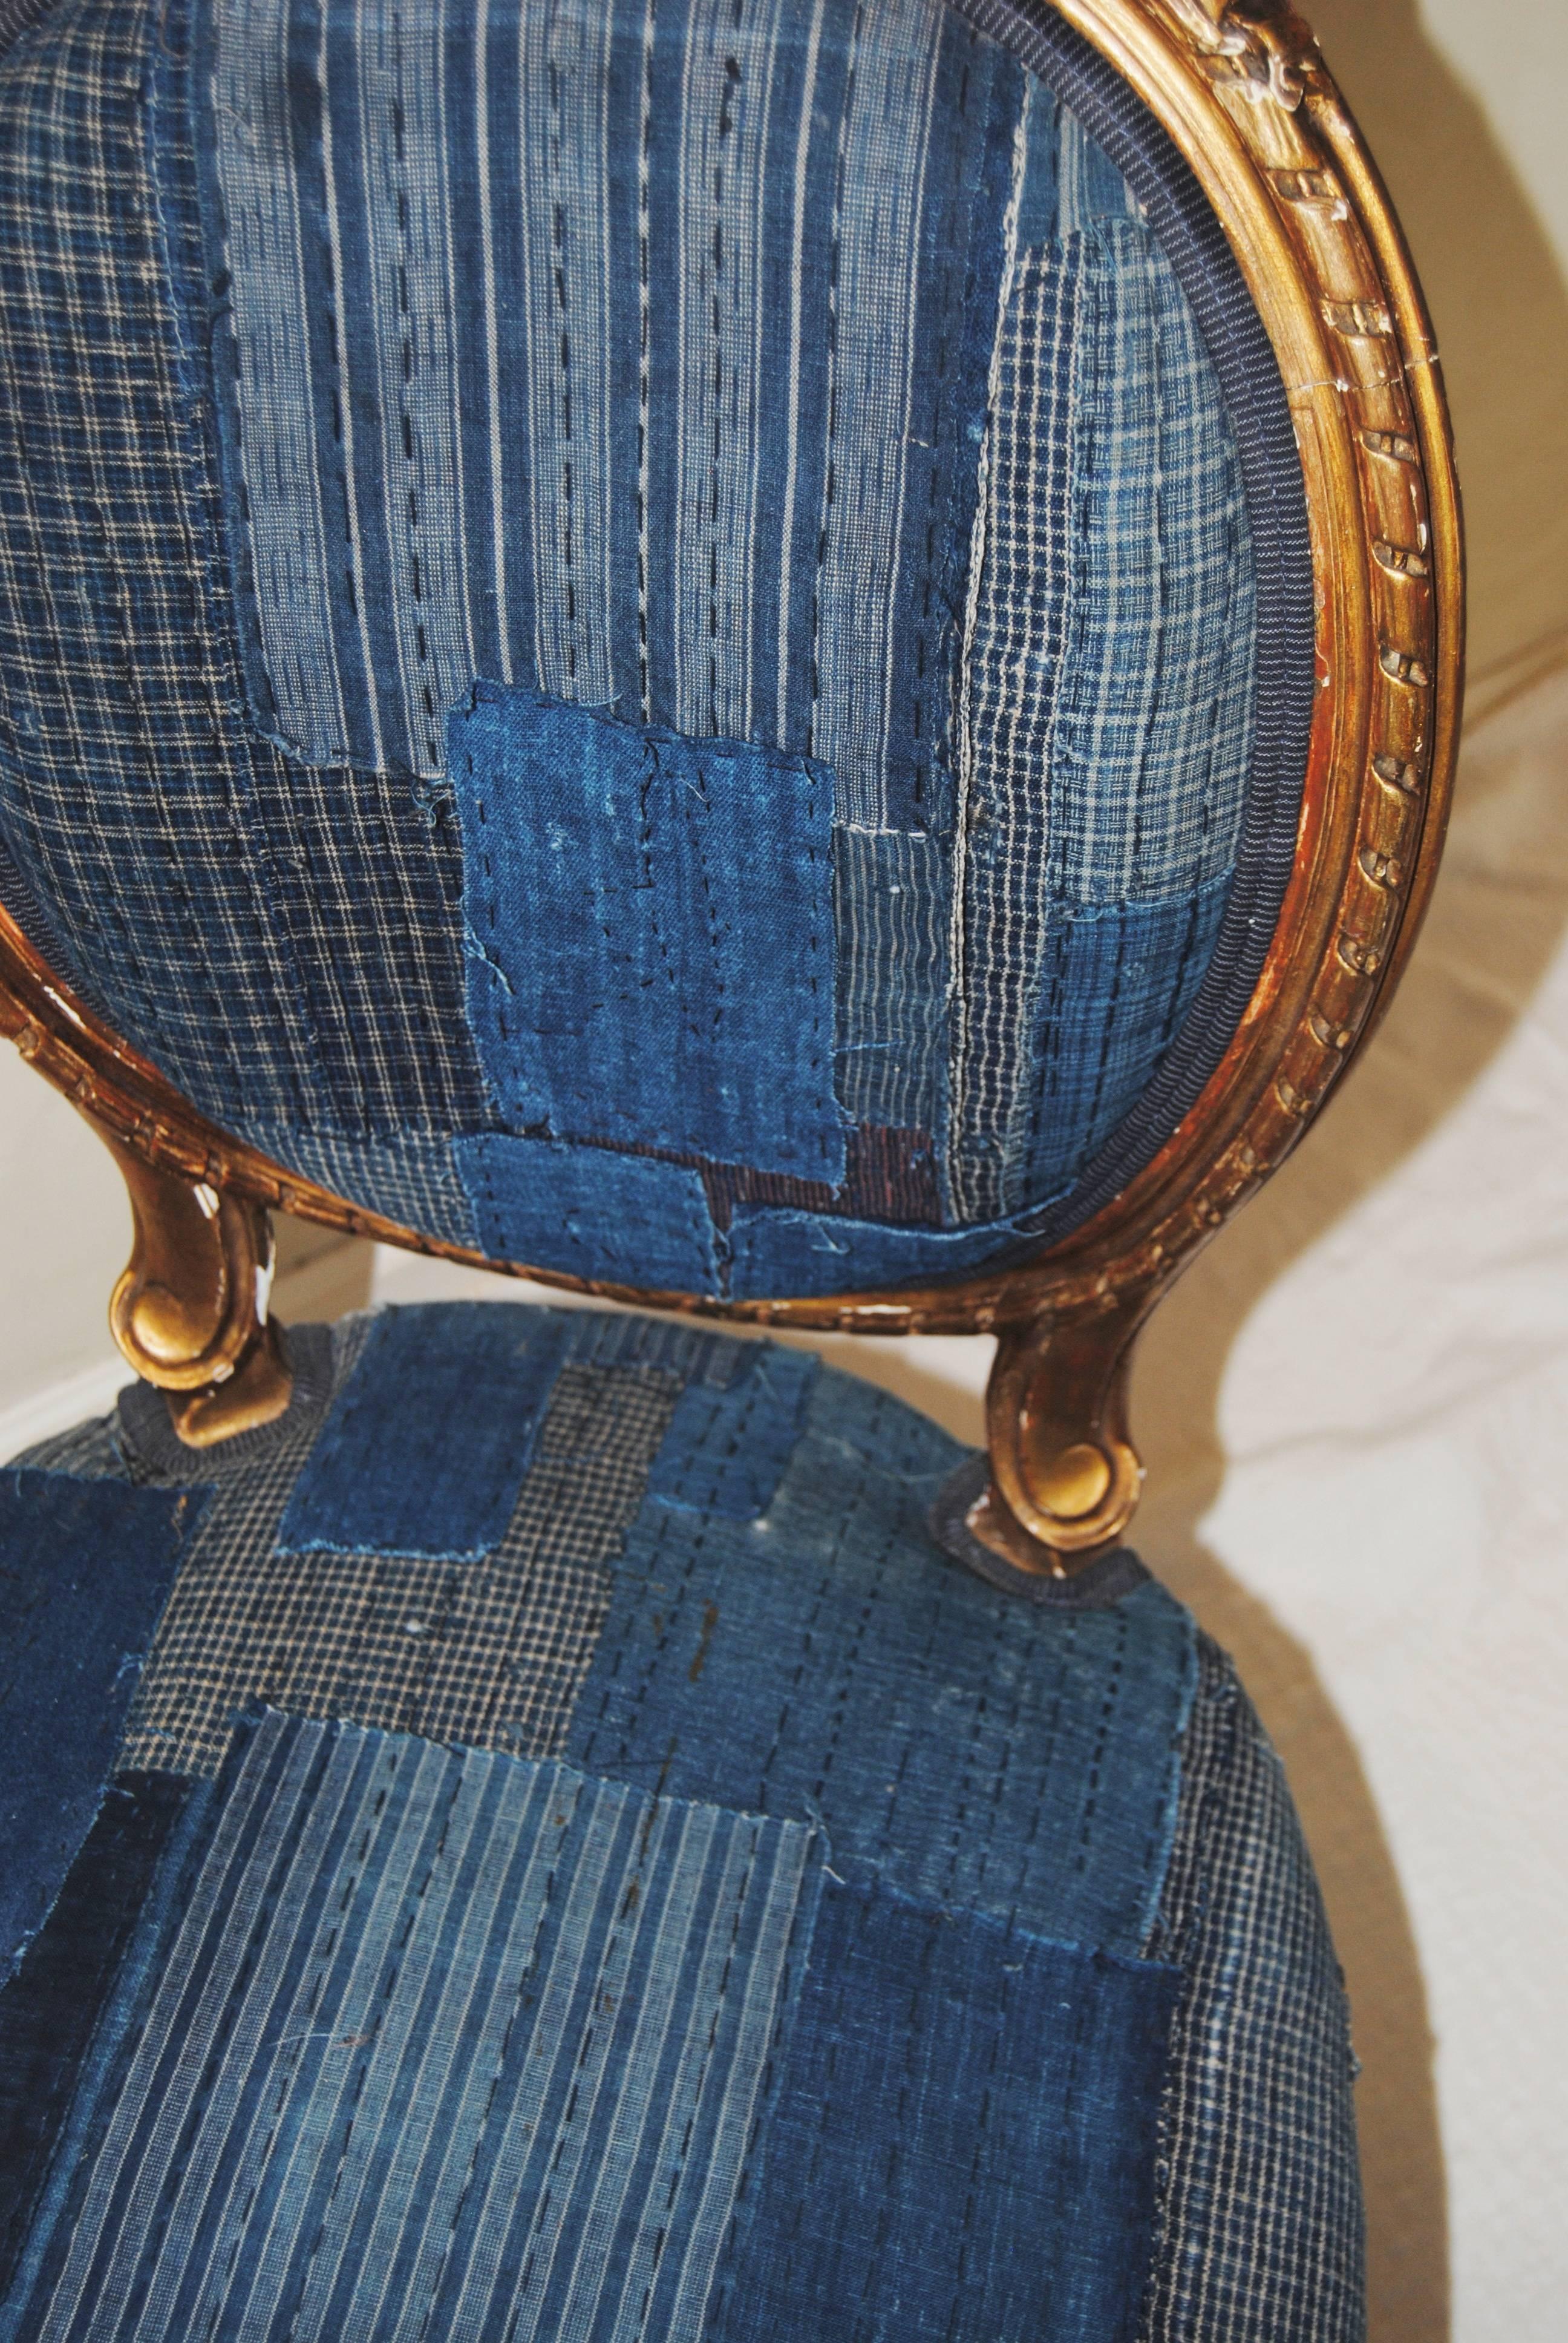 Antique French Gilt Chair Upholstered in an Antique Japanese Indigo Boro Textile In Good Condition For Sale In Glen Ellyn, IL